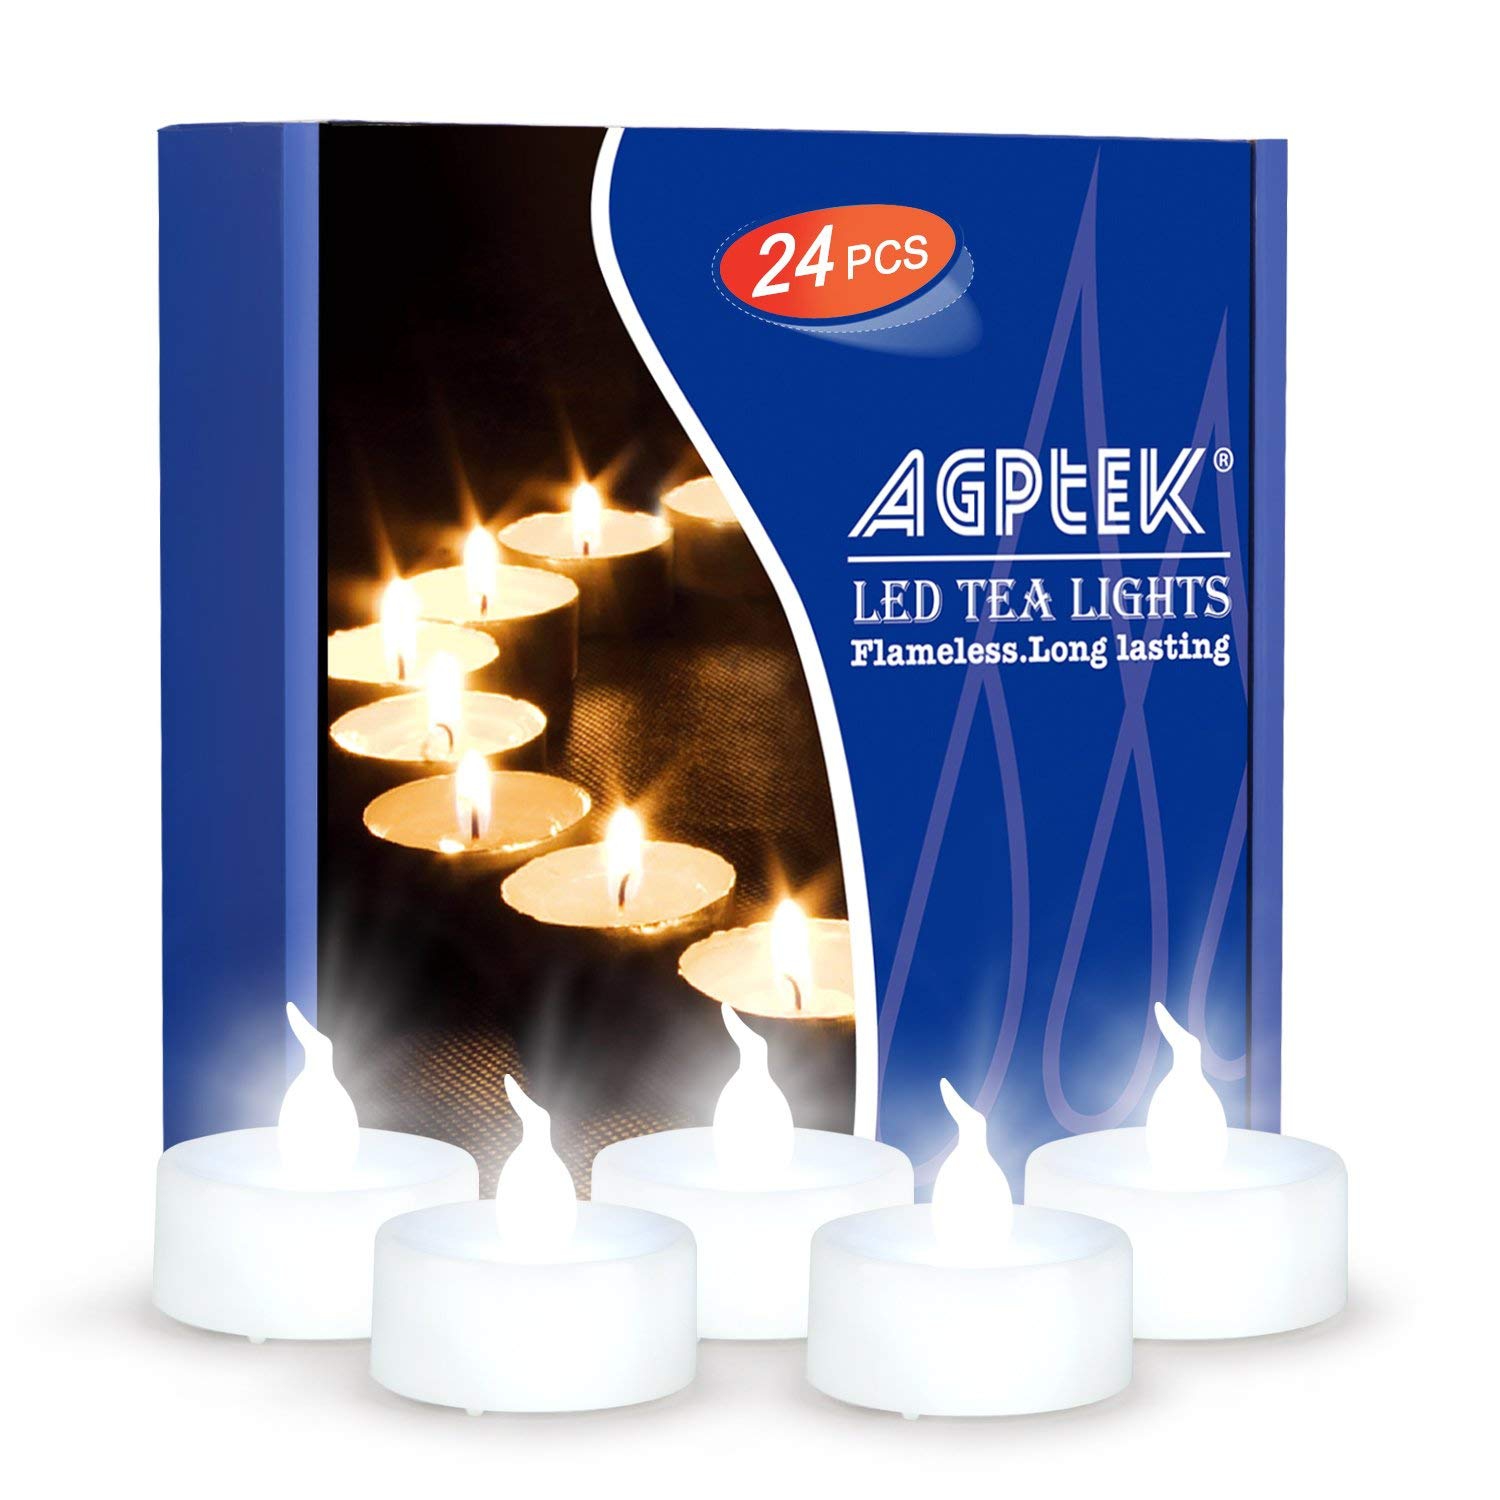 24 PCS Battery Operated Flameless LED Tealights Candles - Cool White